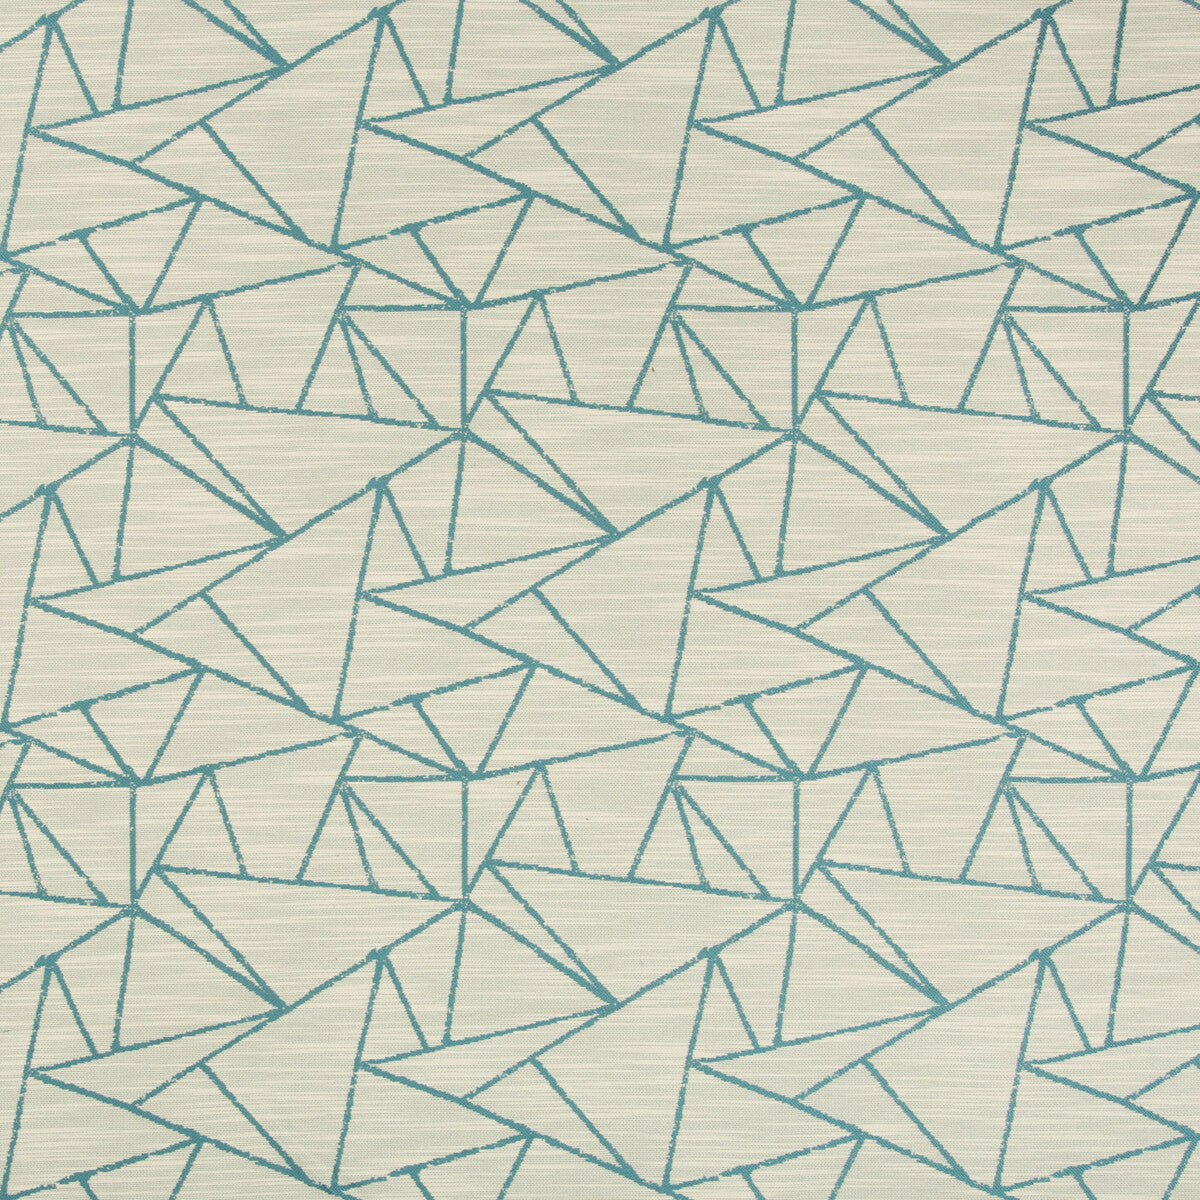 Kravet Contract fabric in 35019-15 color - pattern 35019.15.0 - by Kravet Contract in the Incase Crypton Gis collection